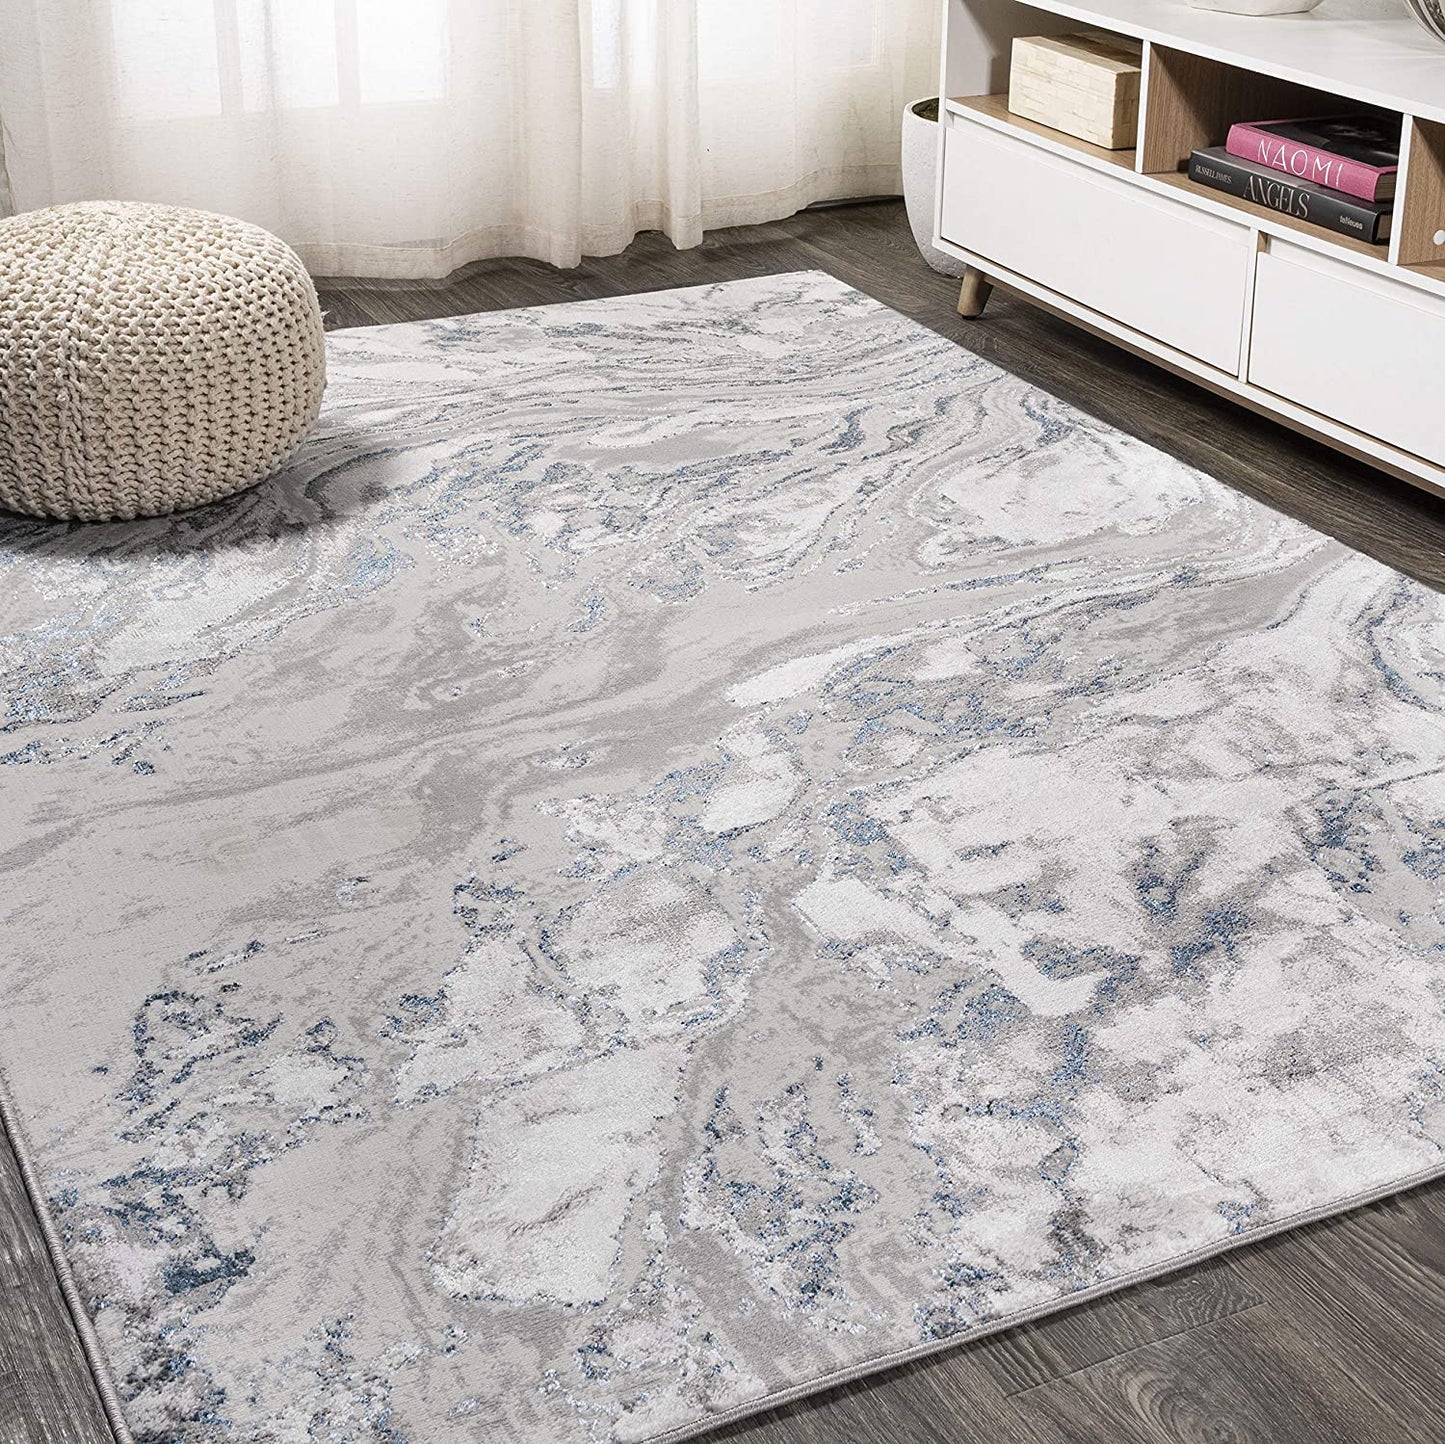 Swirl Marbled Abstract Gray/Blue Soft Area Rug